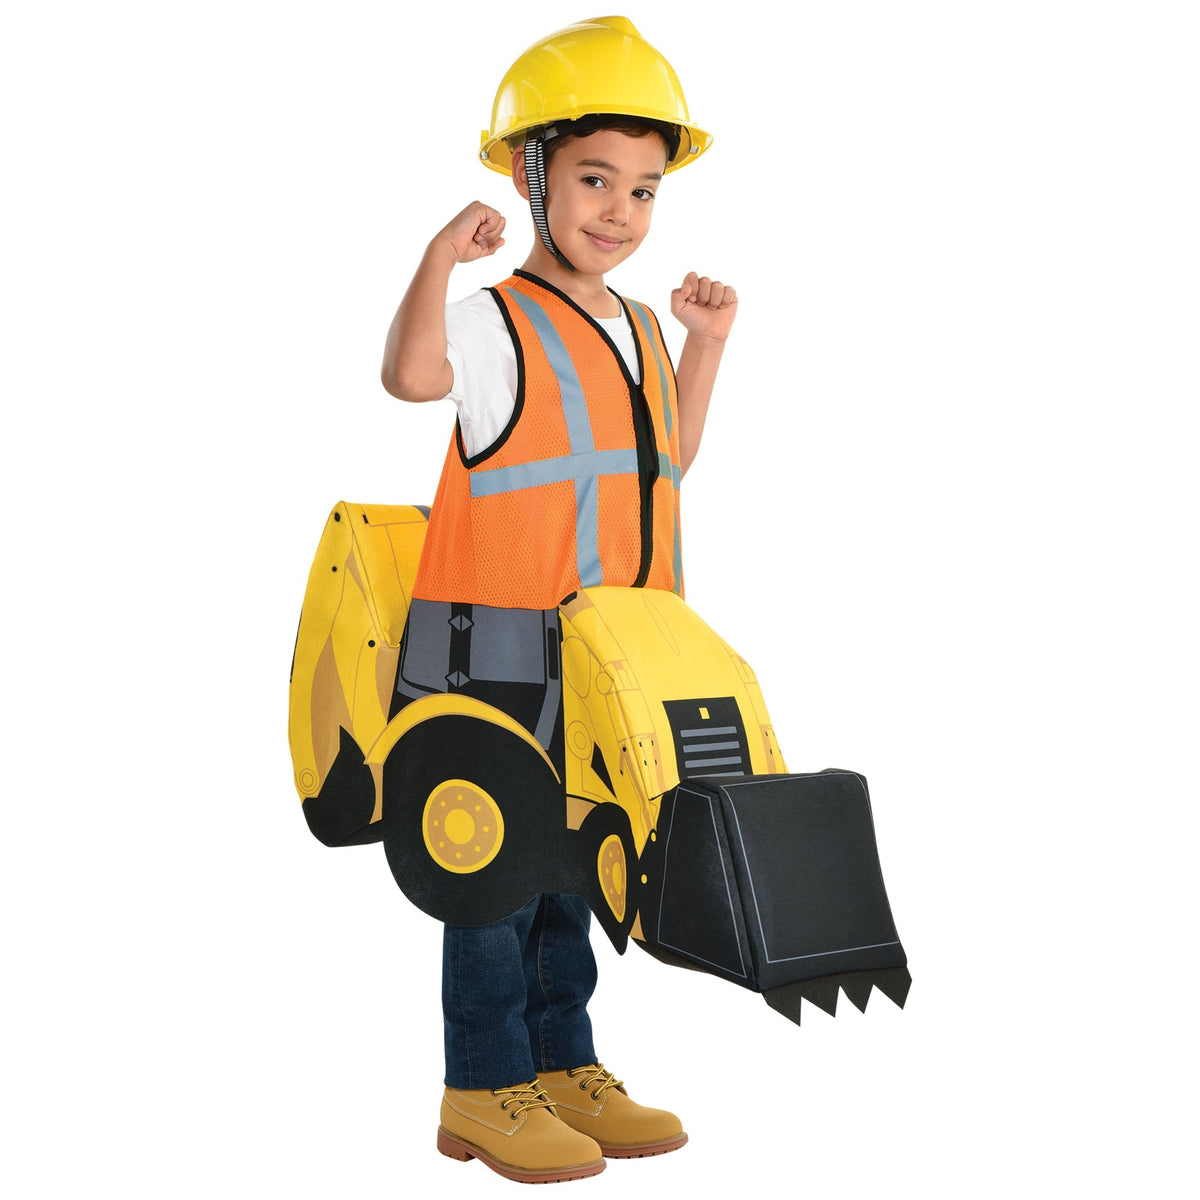 HALLOWEEN COSTUME CO. Costumes Digger Ride-On Costume for Kids, Construction Worker Costume